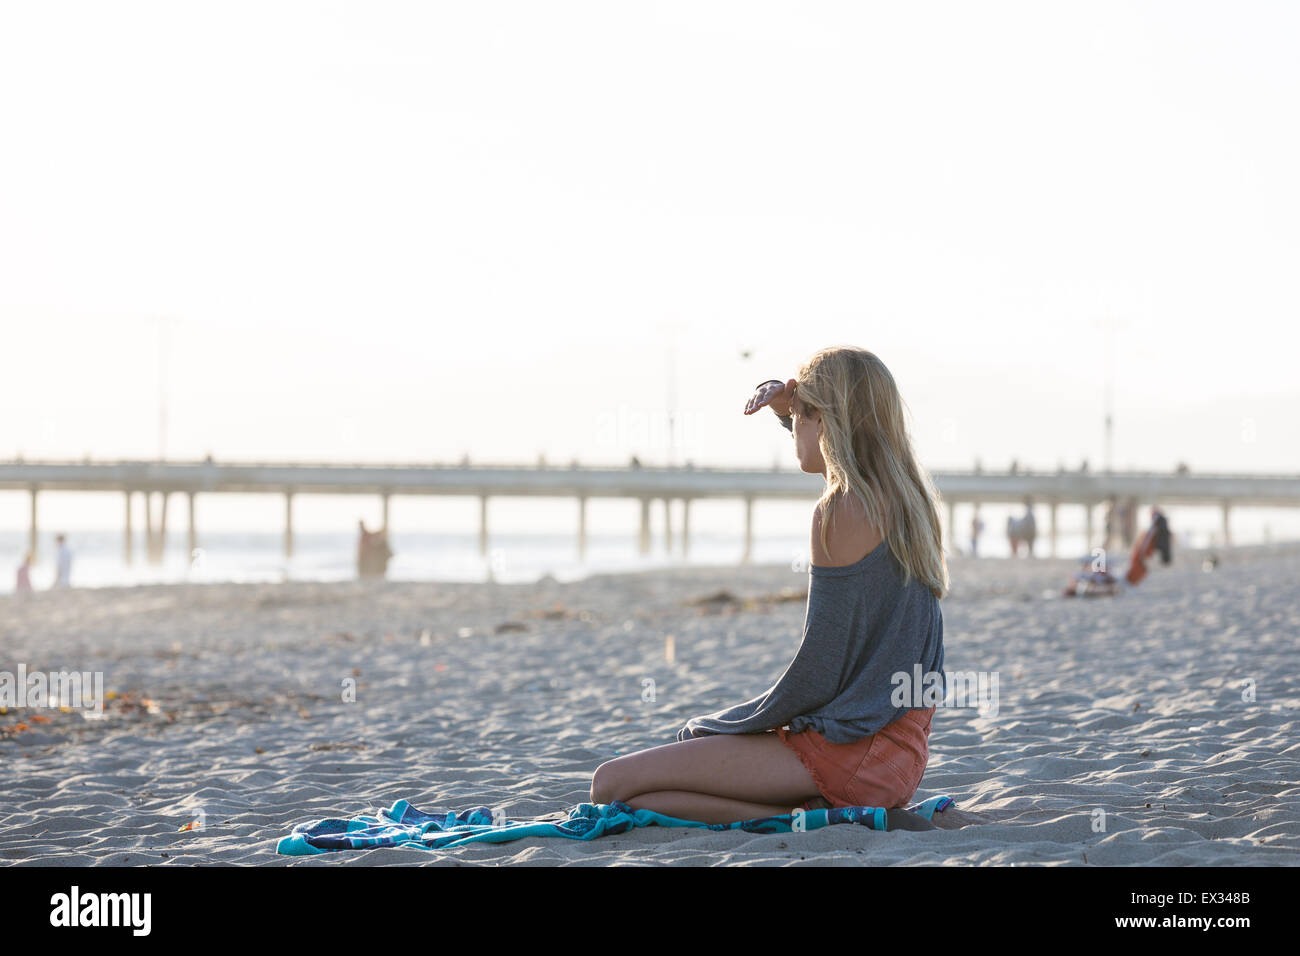 A woman thinks while staring at the ocean during late afternoon. Stock Photo